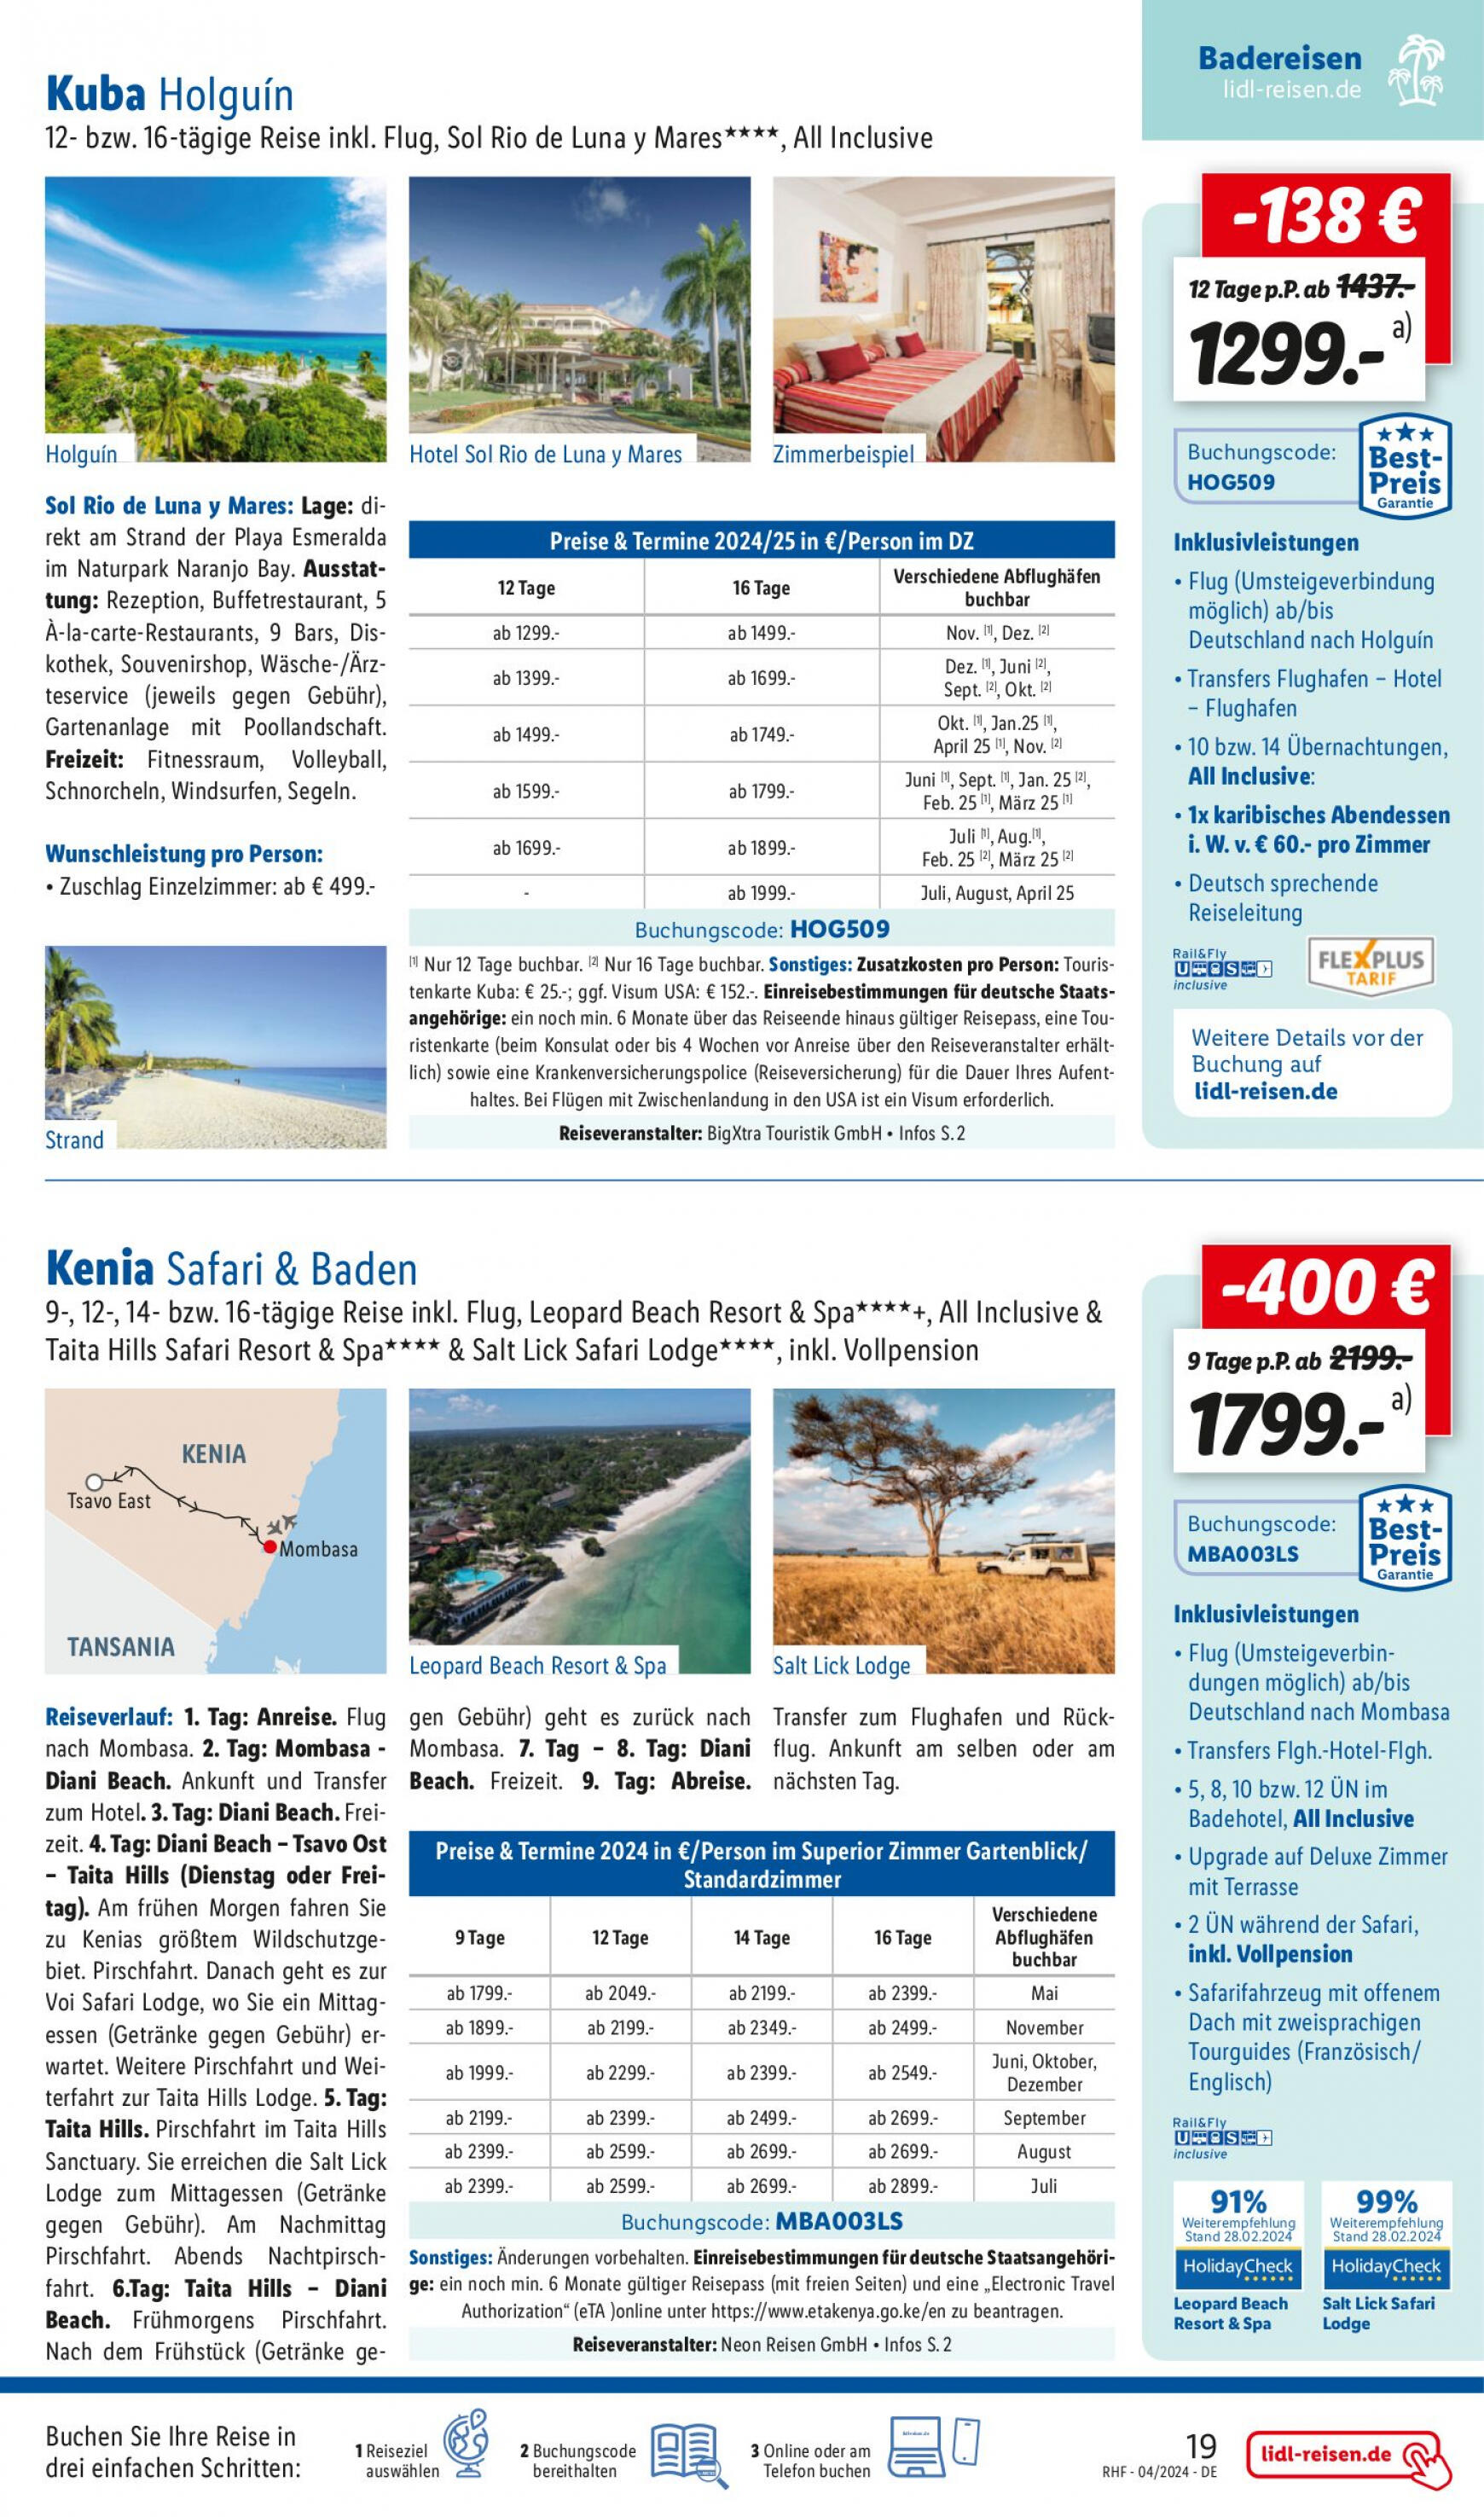 lidl - Flyer Lidl - April Reise-Highlights aktuell 27.03. - 30.04. - page: 19